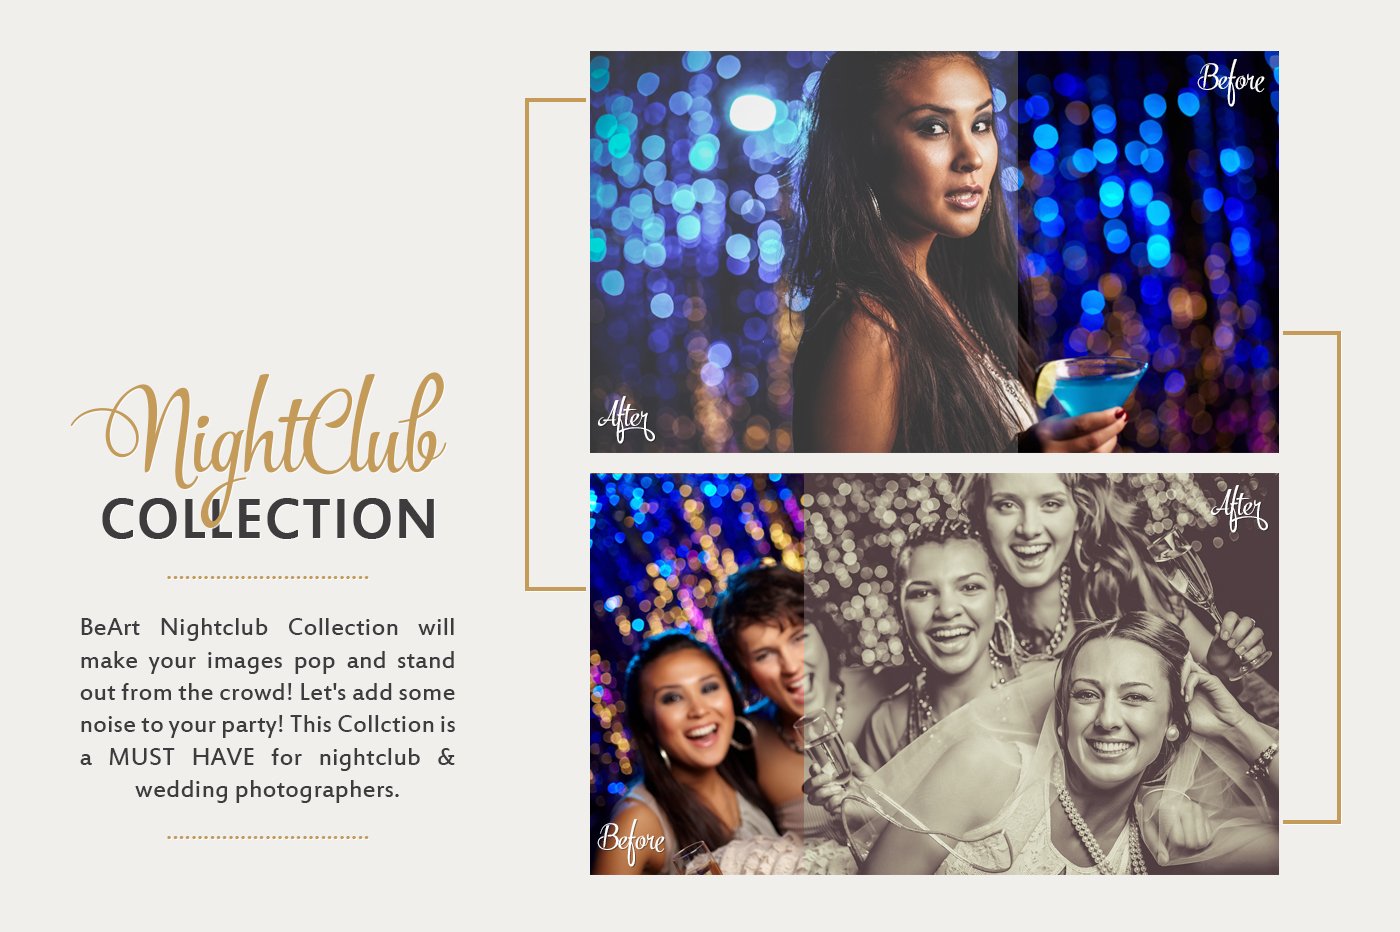 before after nightclub party lightroom presets by beart presets 28229 515